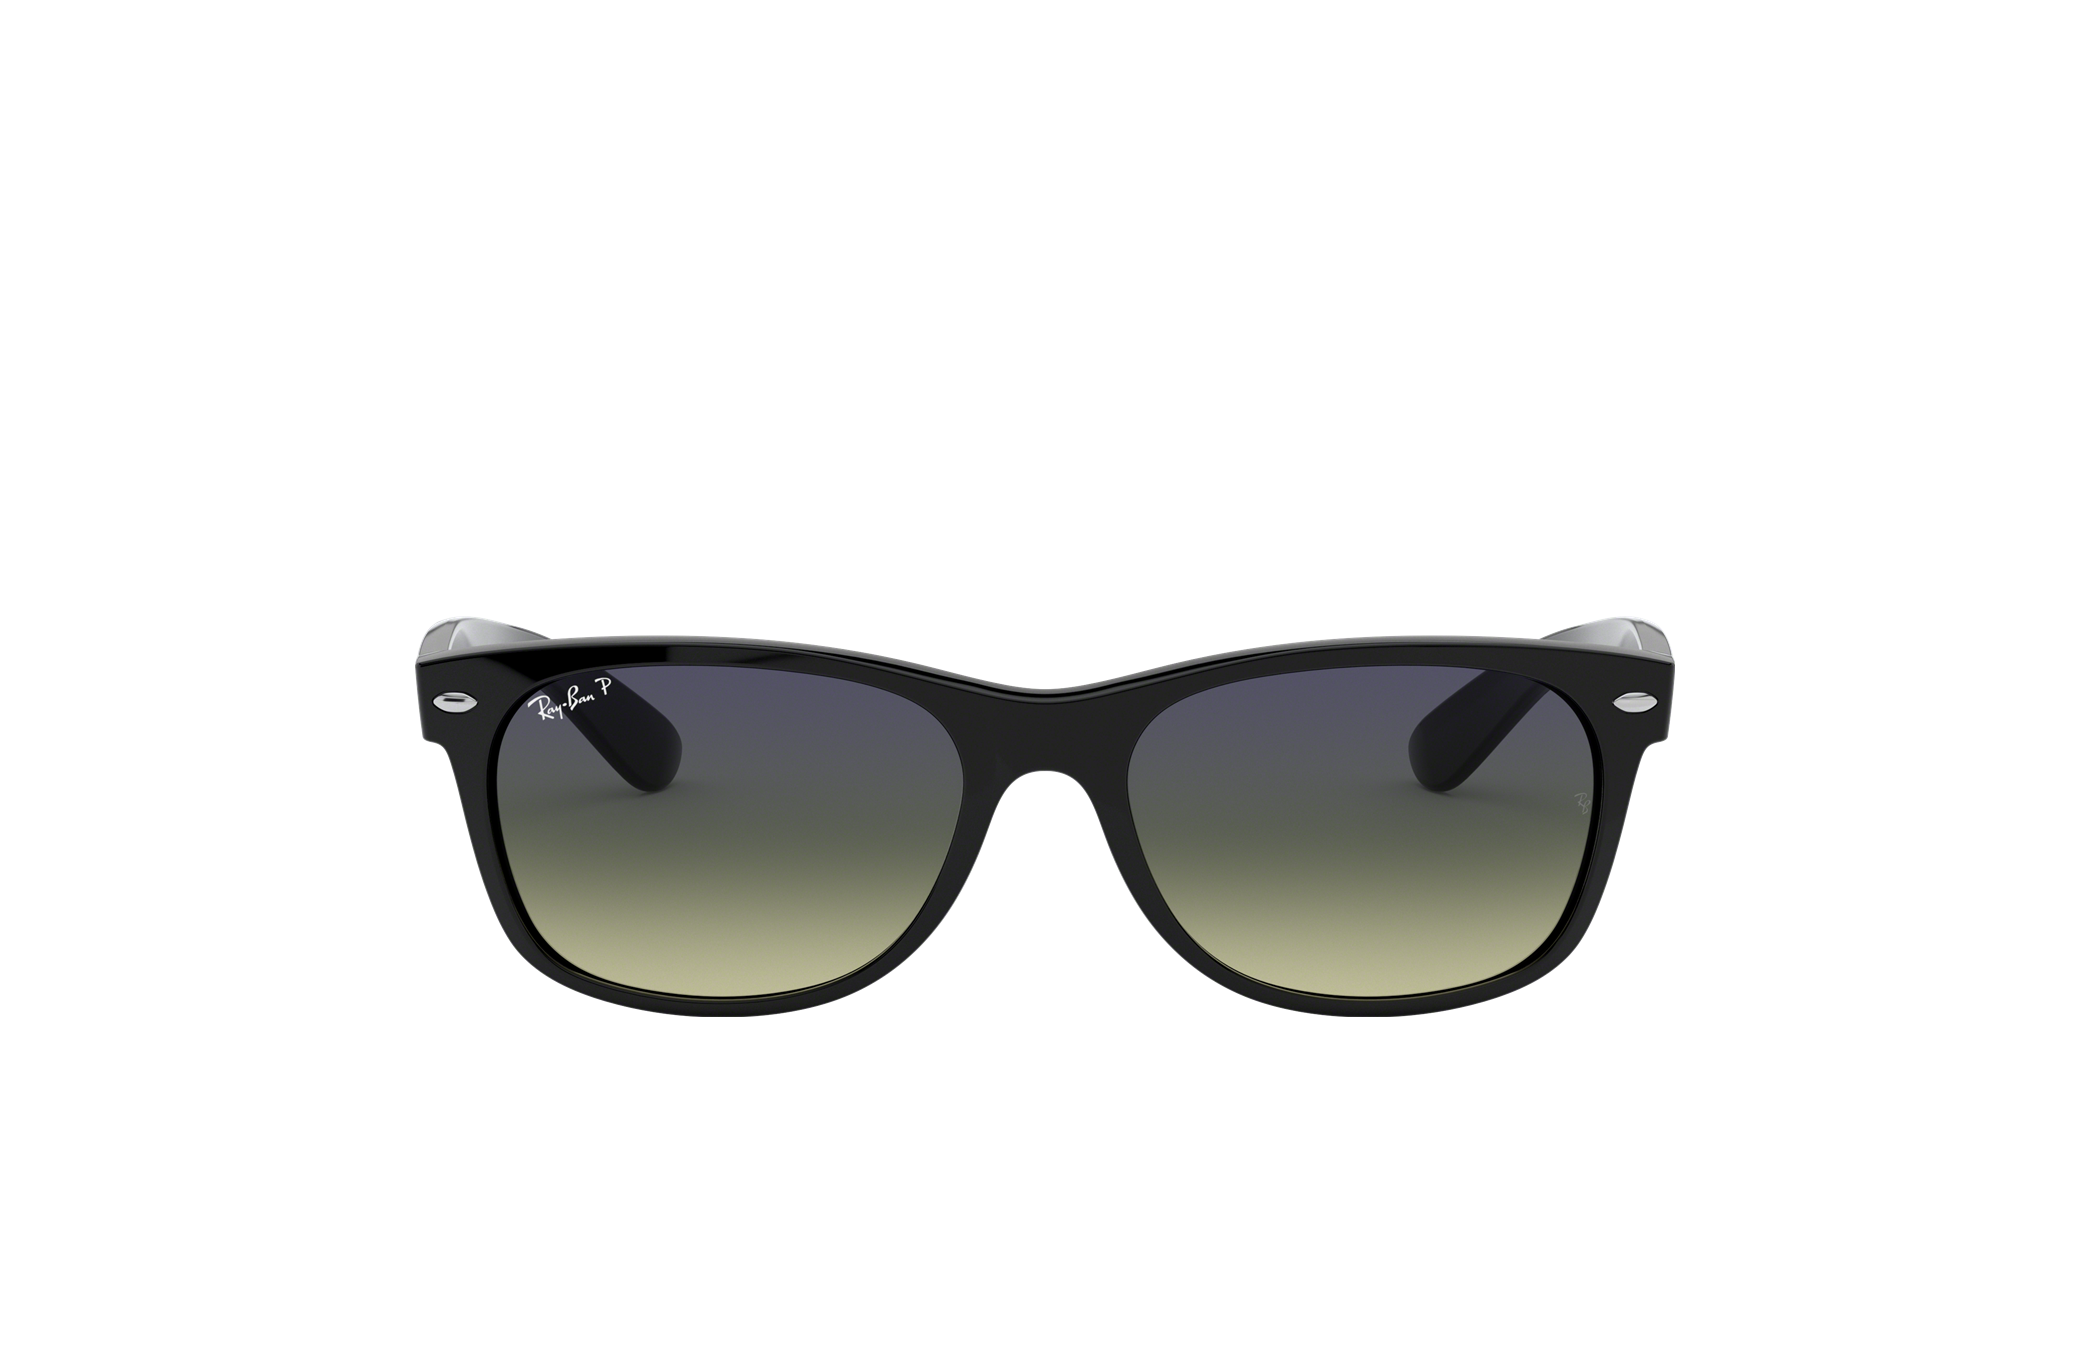 ray ban style glasses